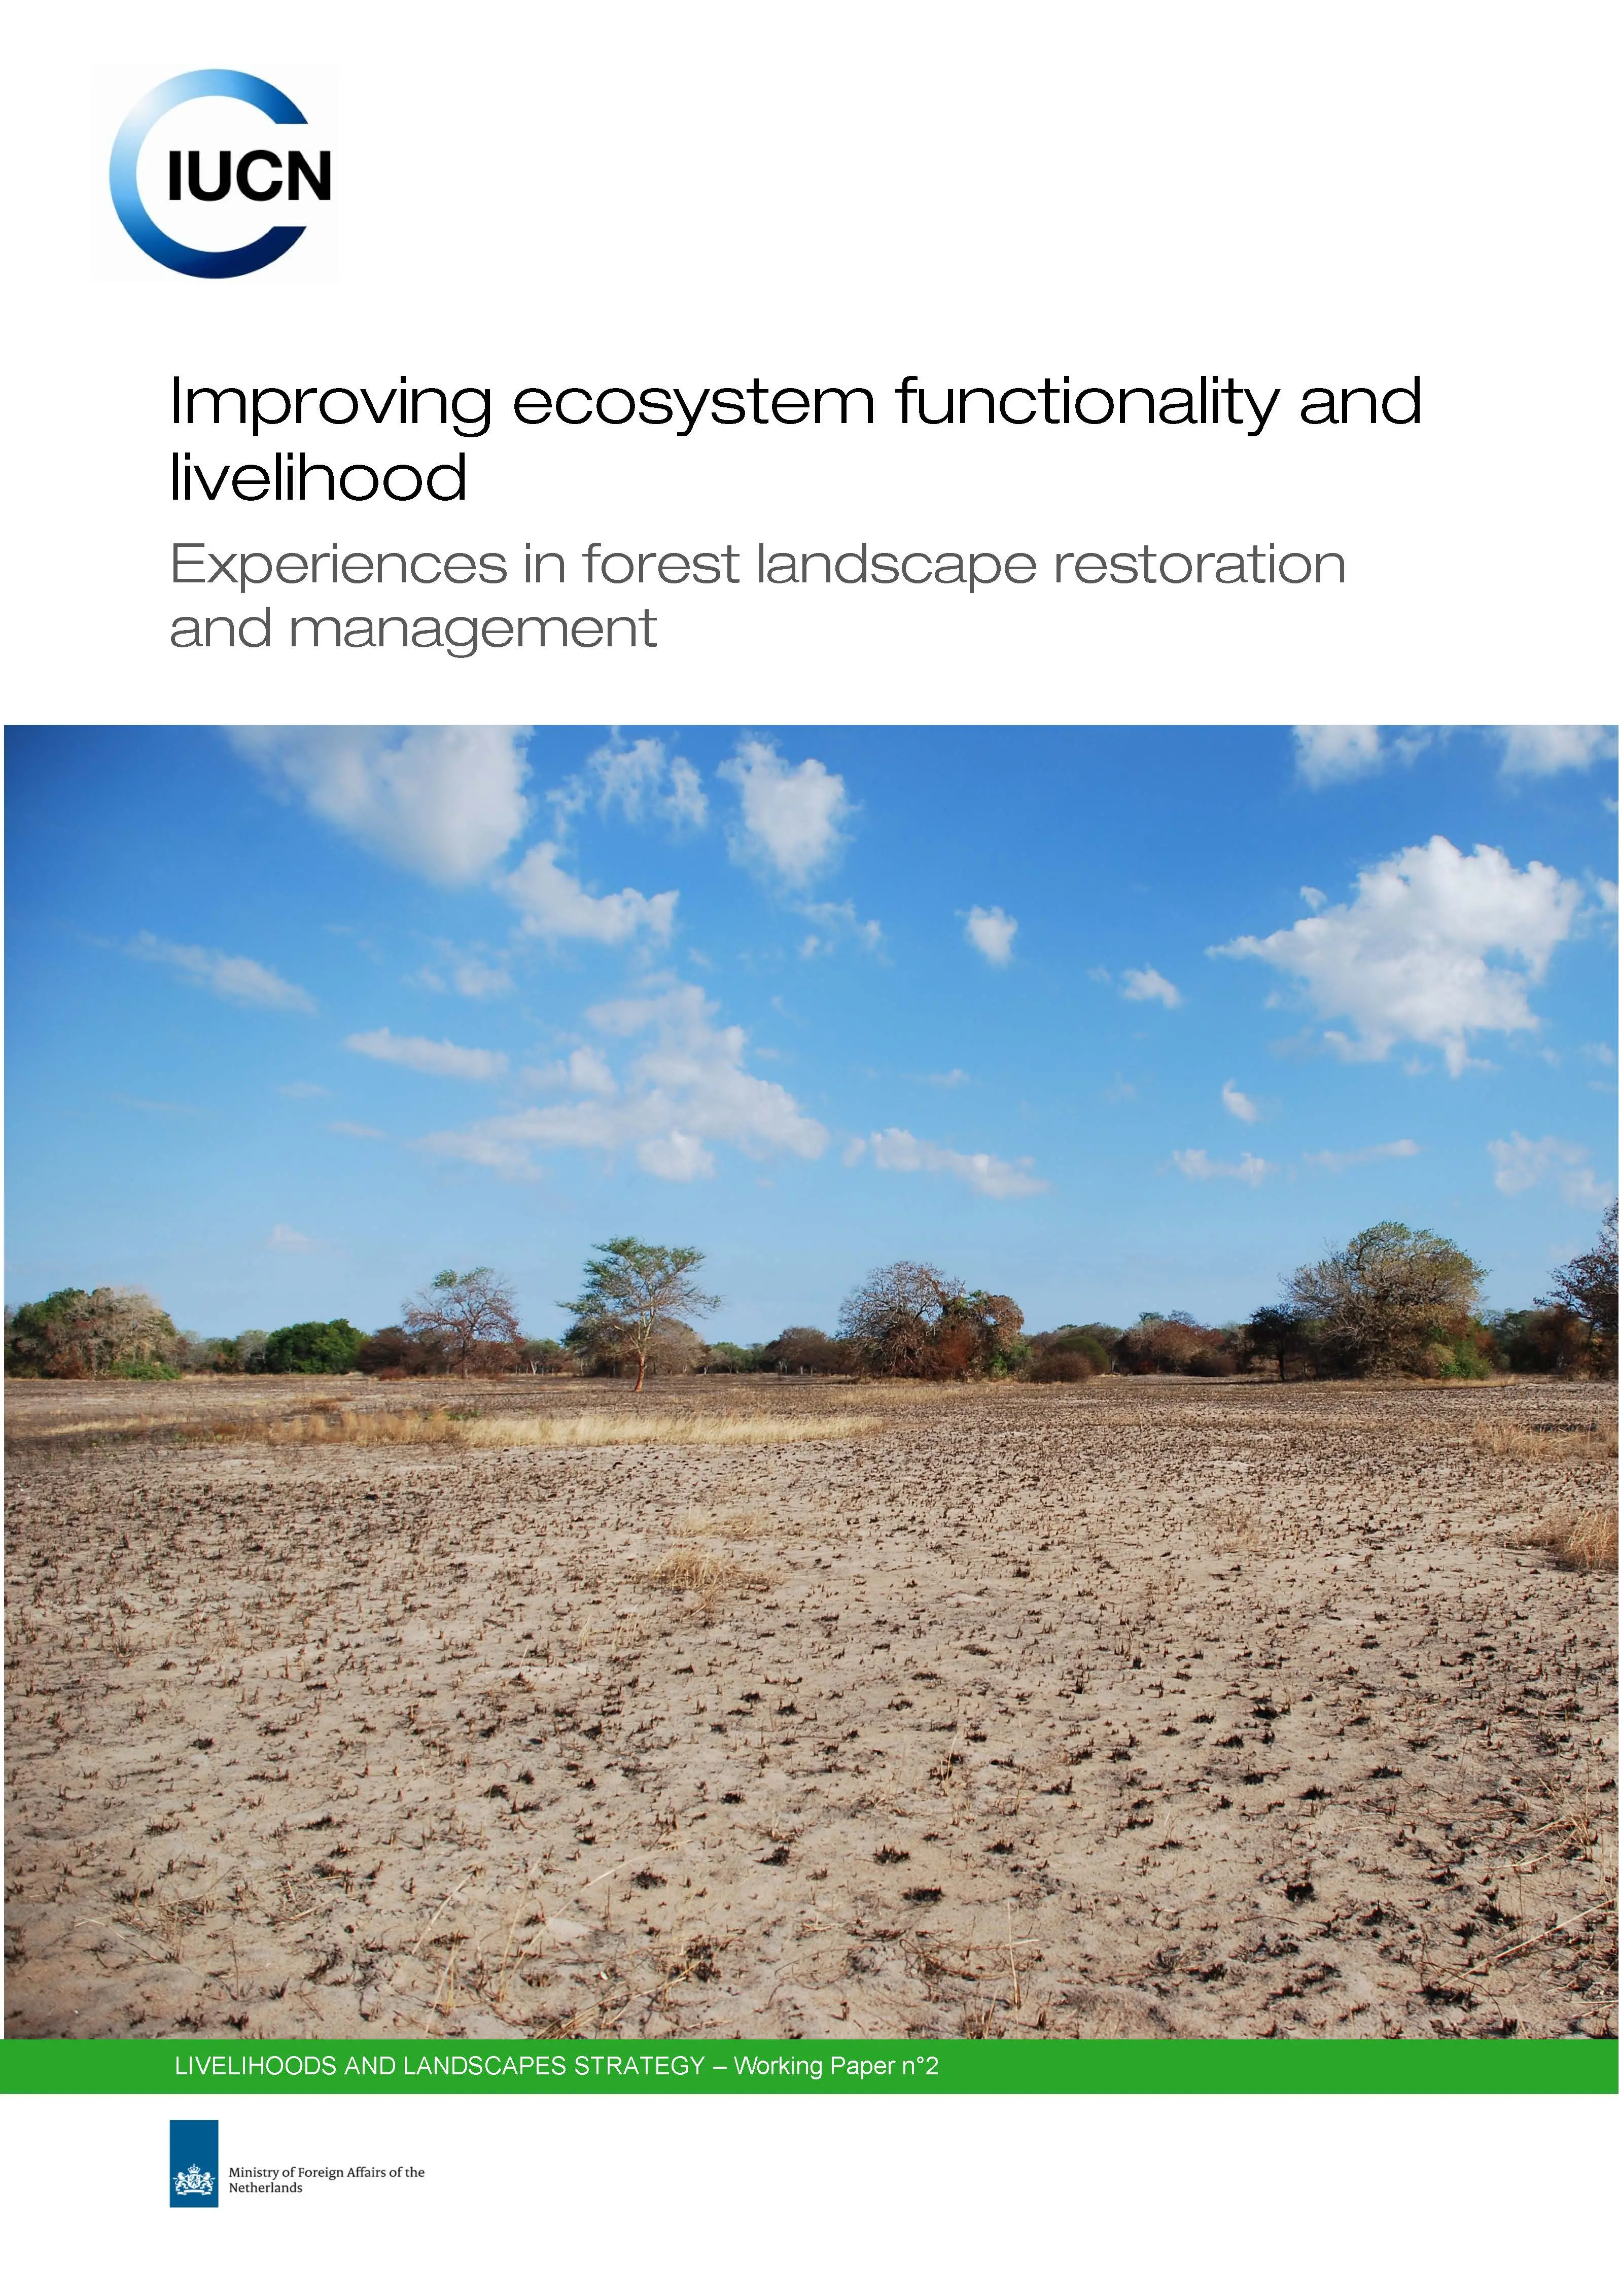 Experiences in forest landscape restoration and management